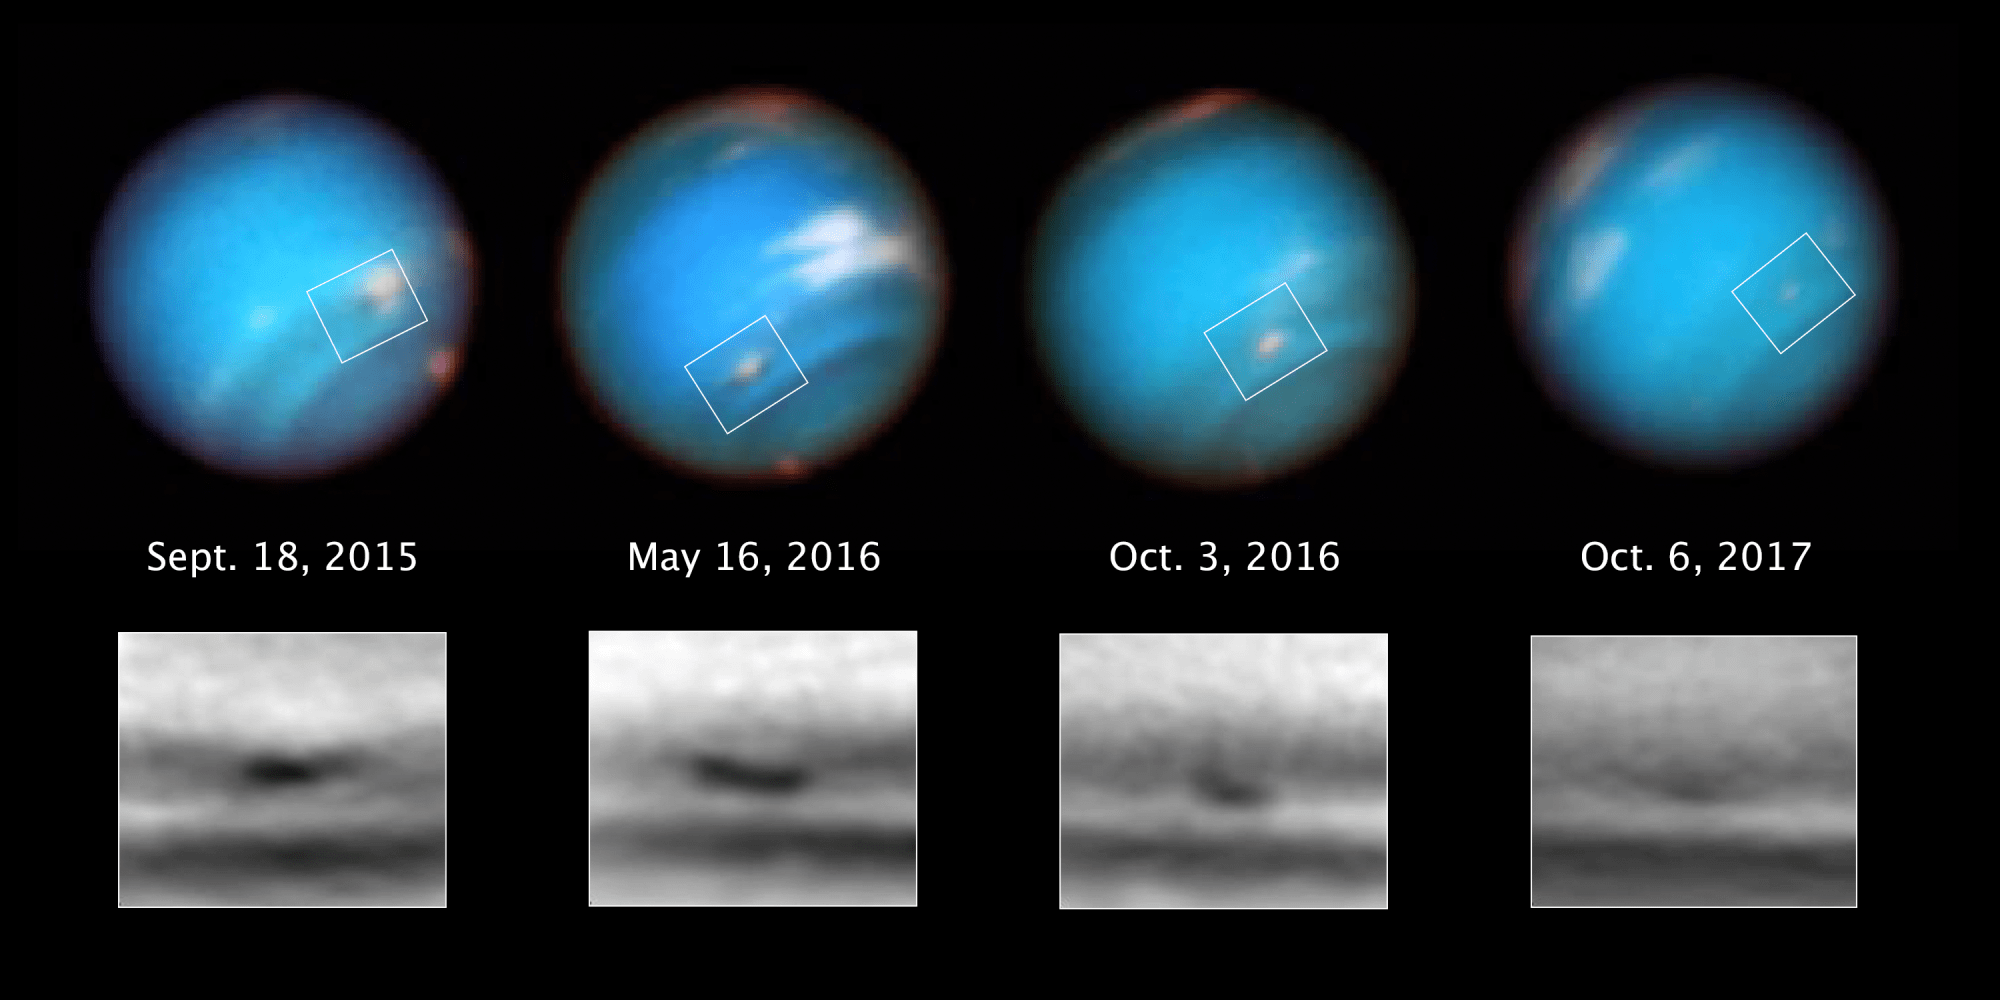 four part image with globes of neptune over BW closeups